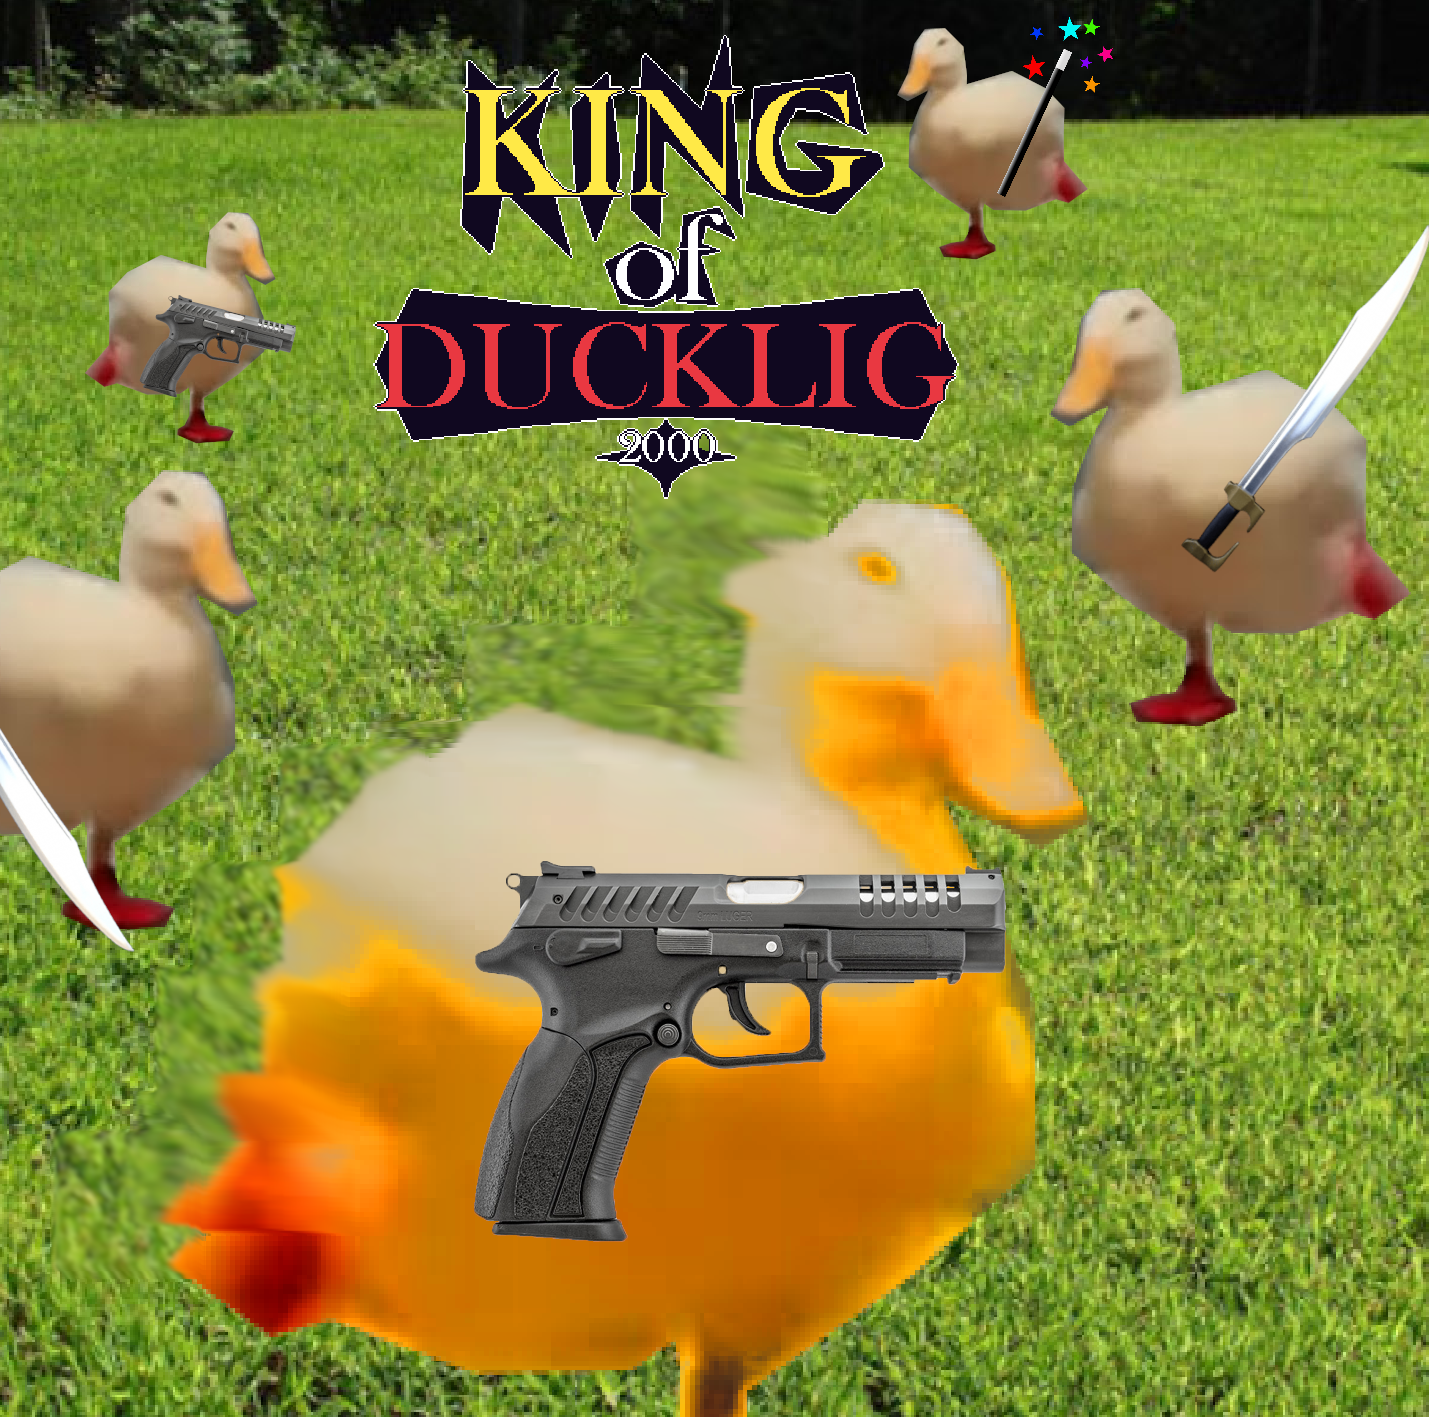 King of Duckling 2000